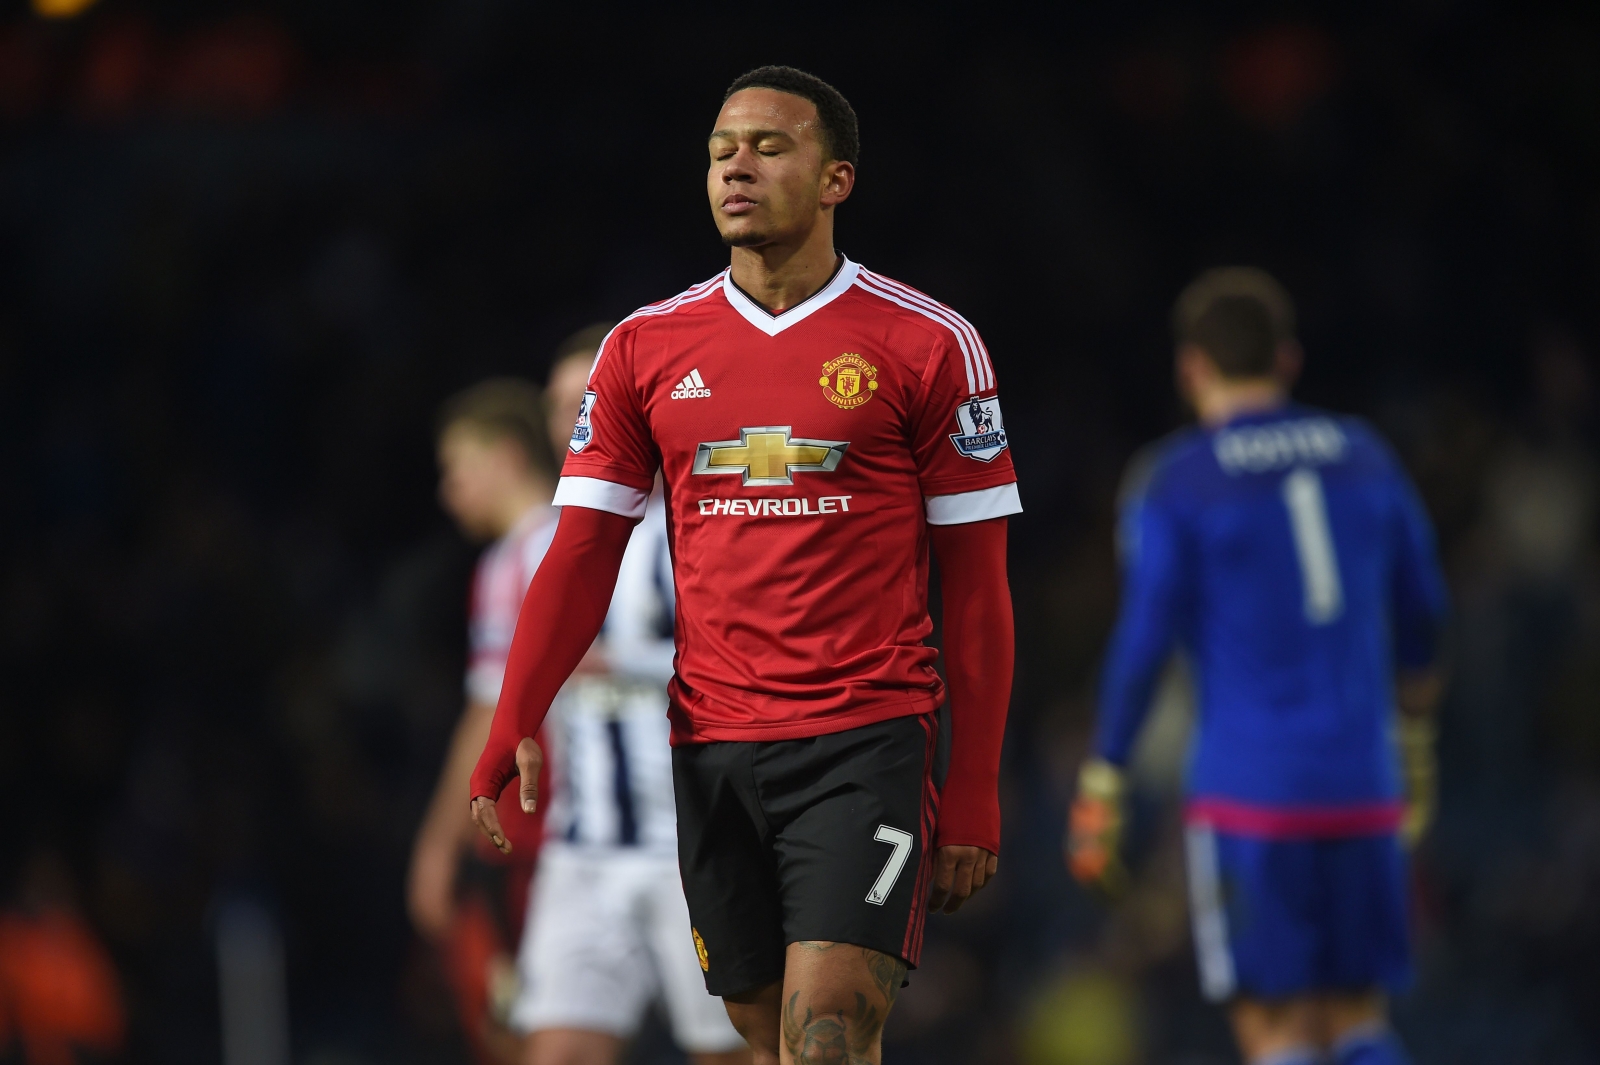 Memphis Depay was too young at Manchester United says Ronald